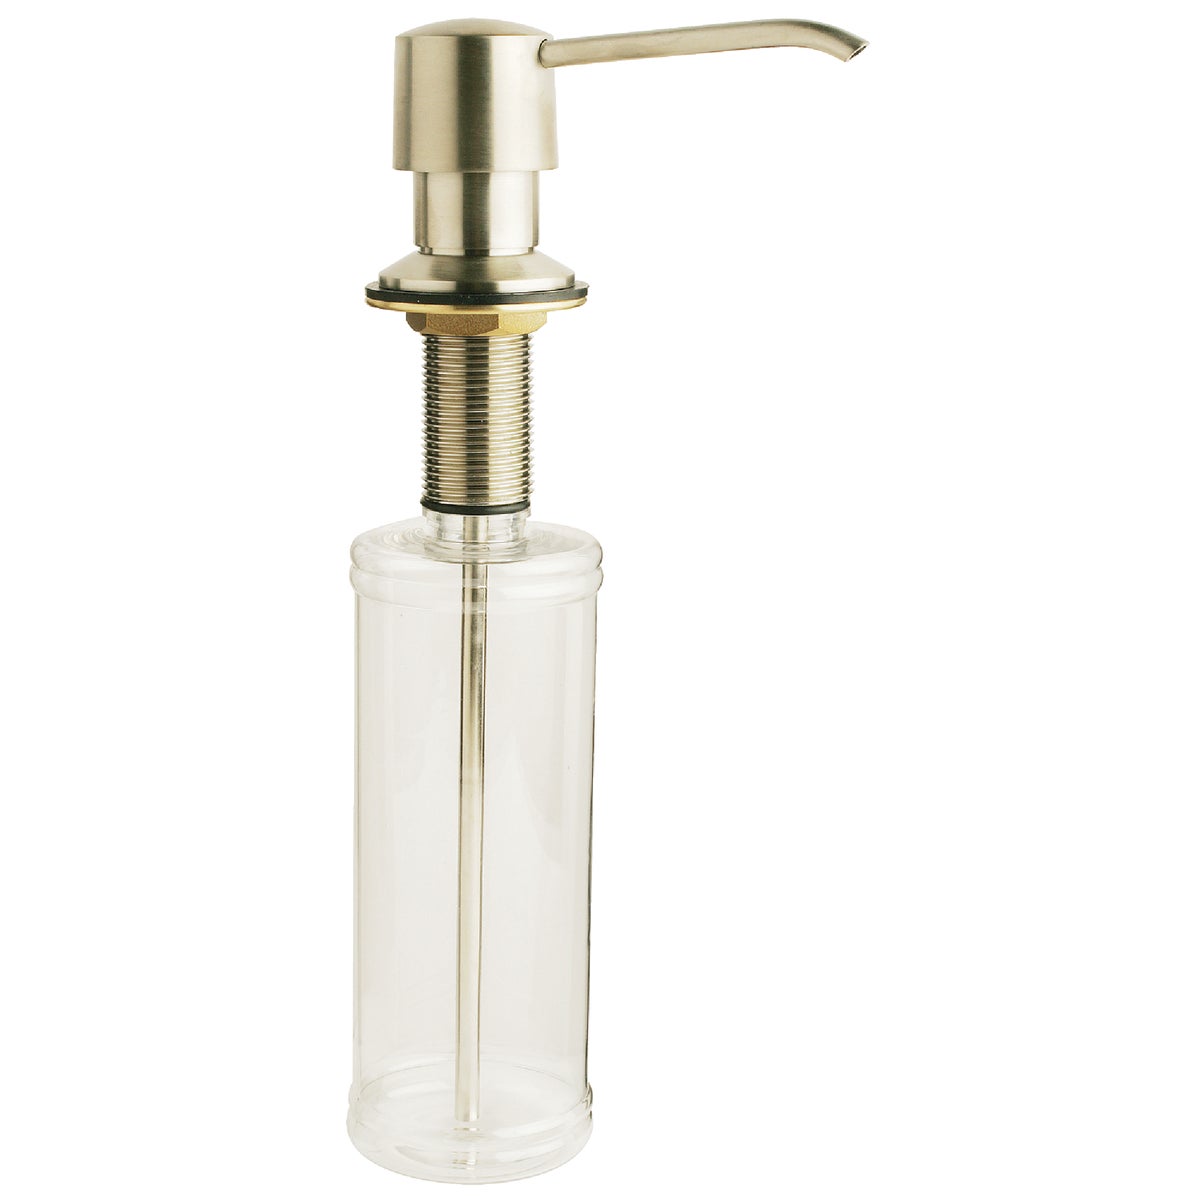 Do it Brushed Nickel Clear Body Soap Dispenser